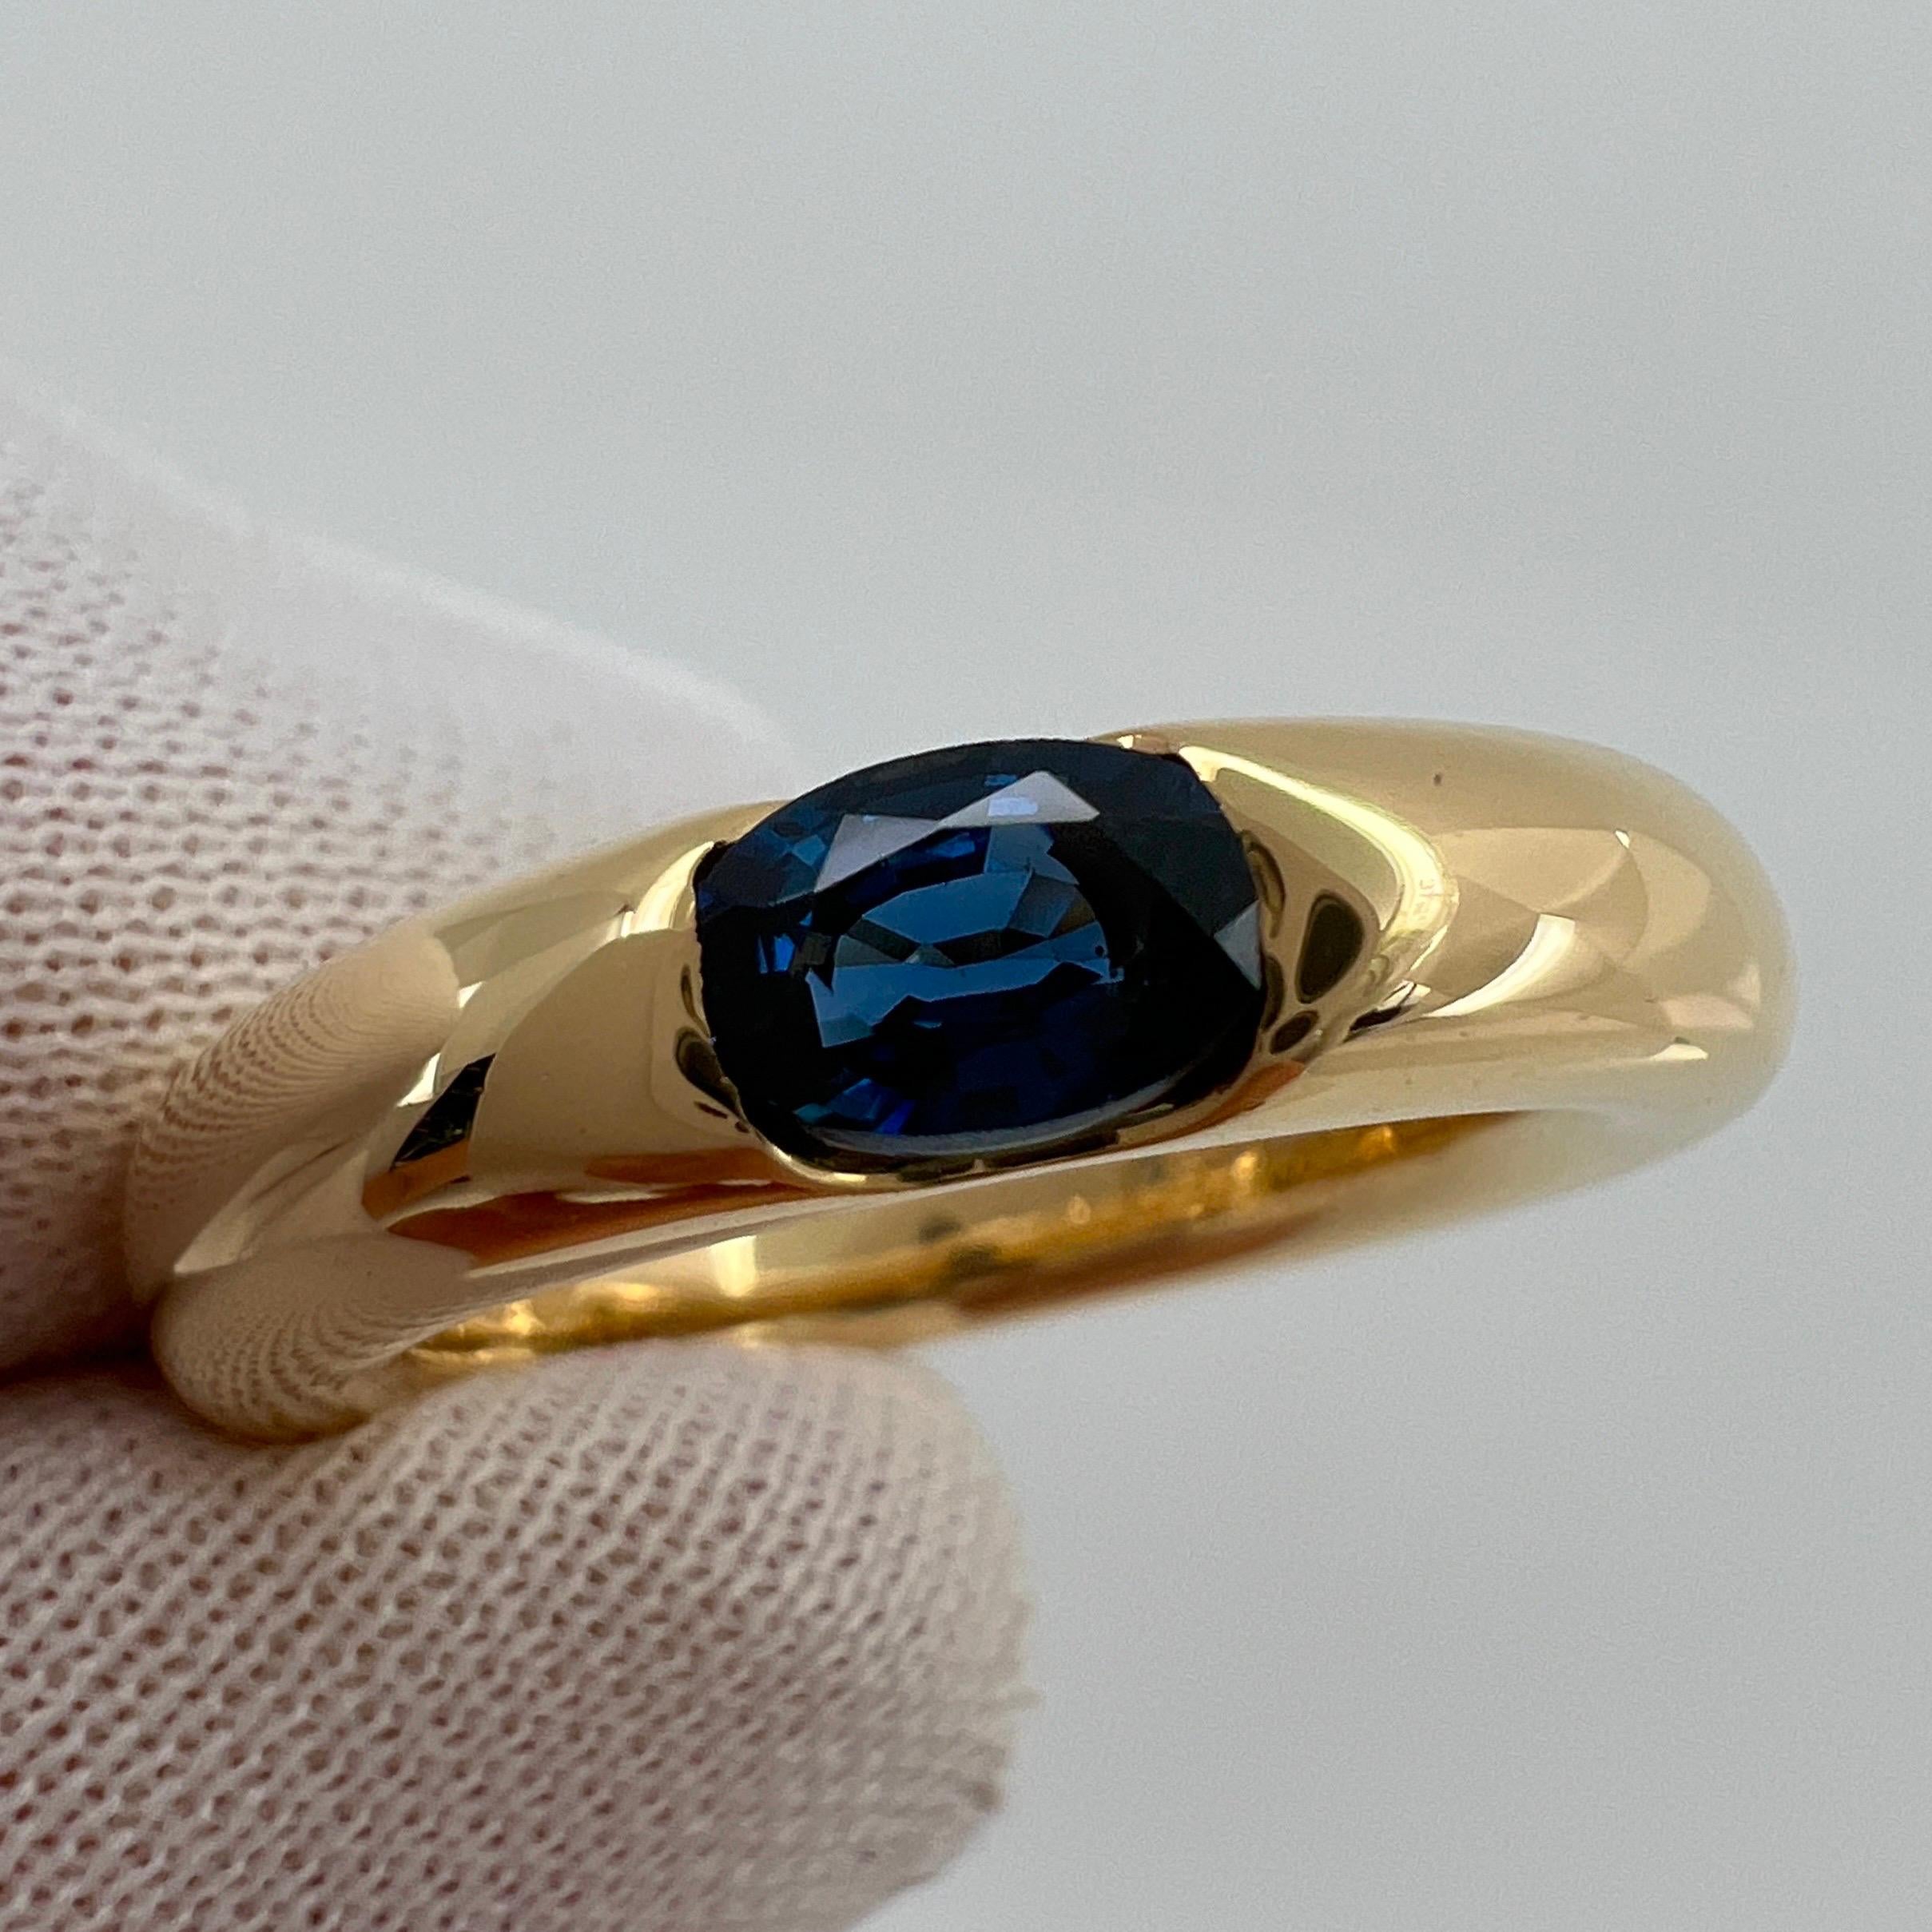 Vintage Cartier Deep Blue Sapphire Oval Ellipse 18k Yellow Gold Solitaire Ring 1